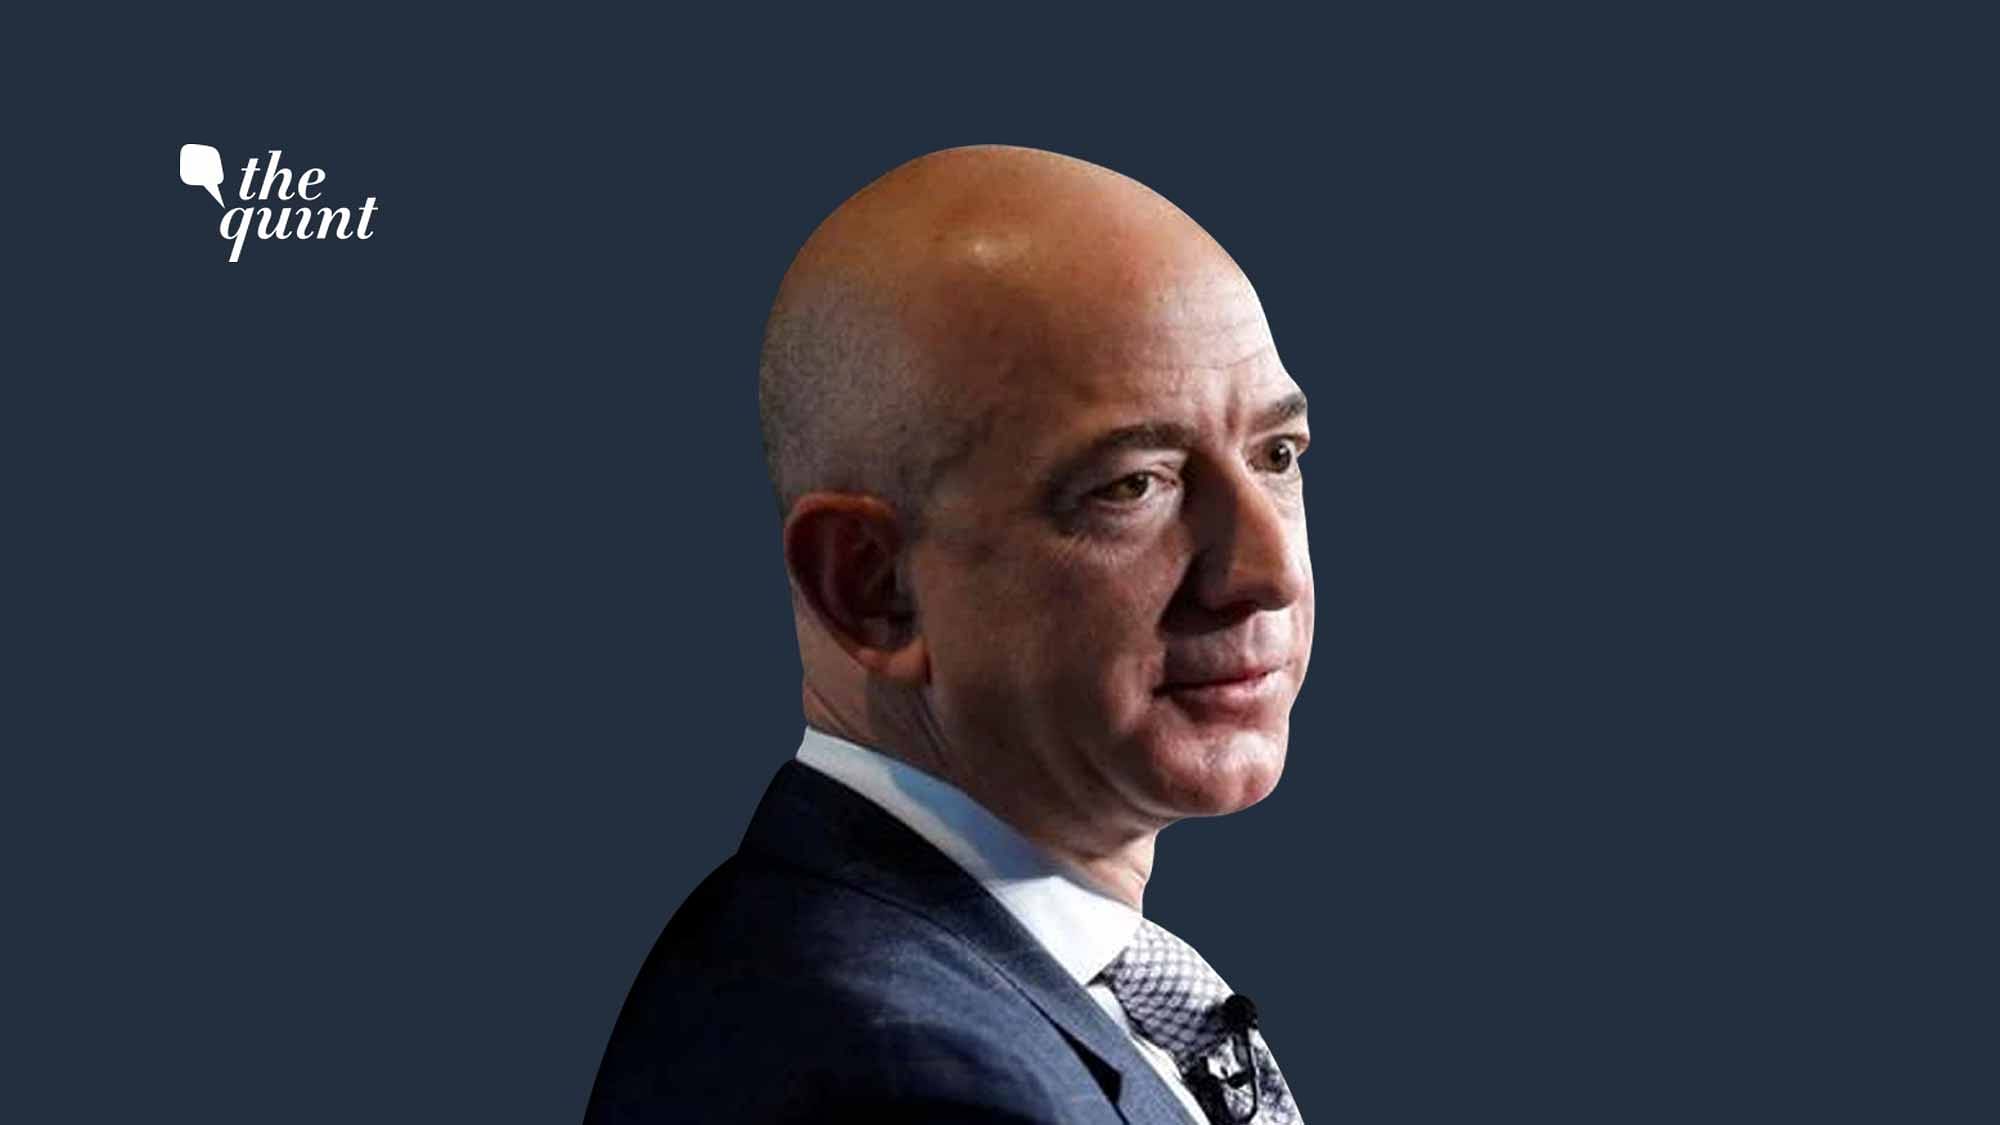 Jeff Bezos, CEO, Amazon has committed a lot from the Indian market.